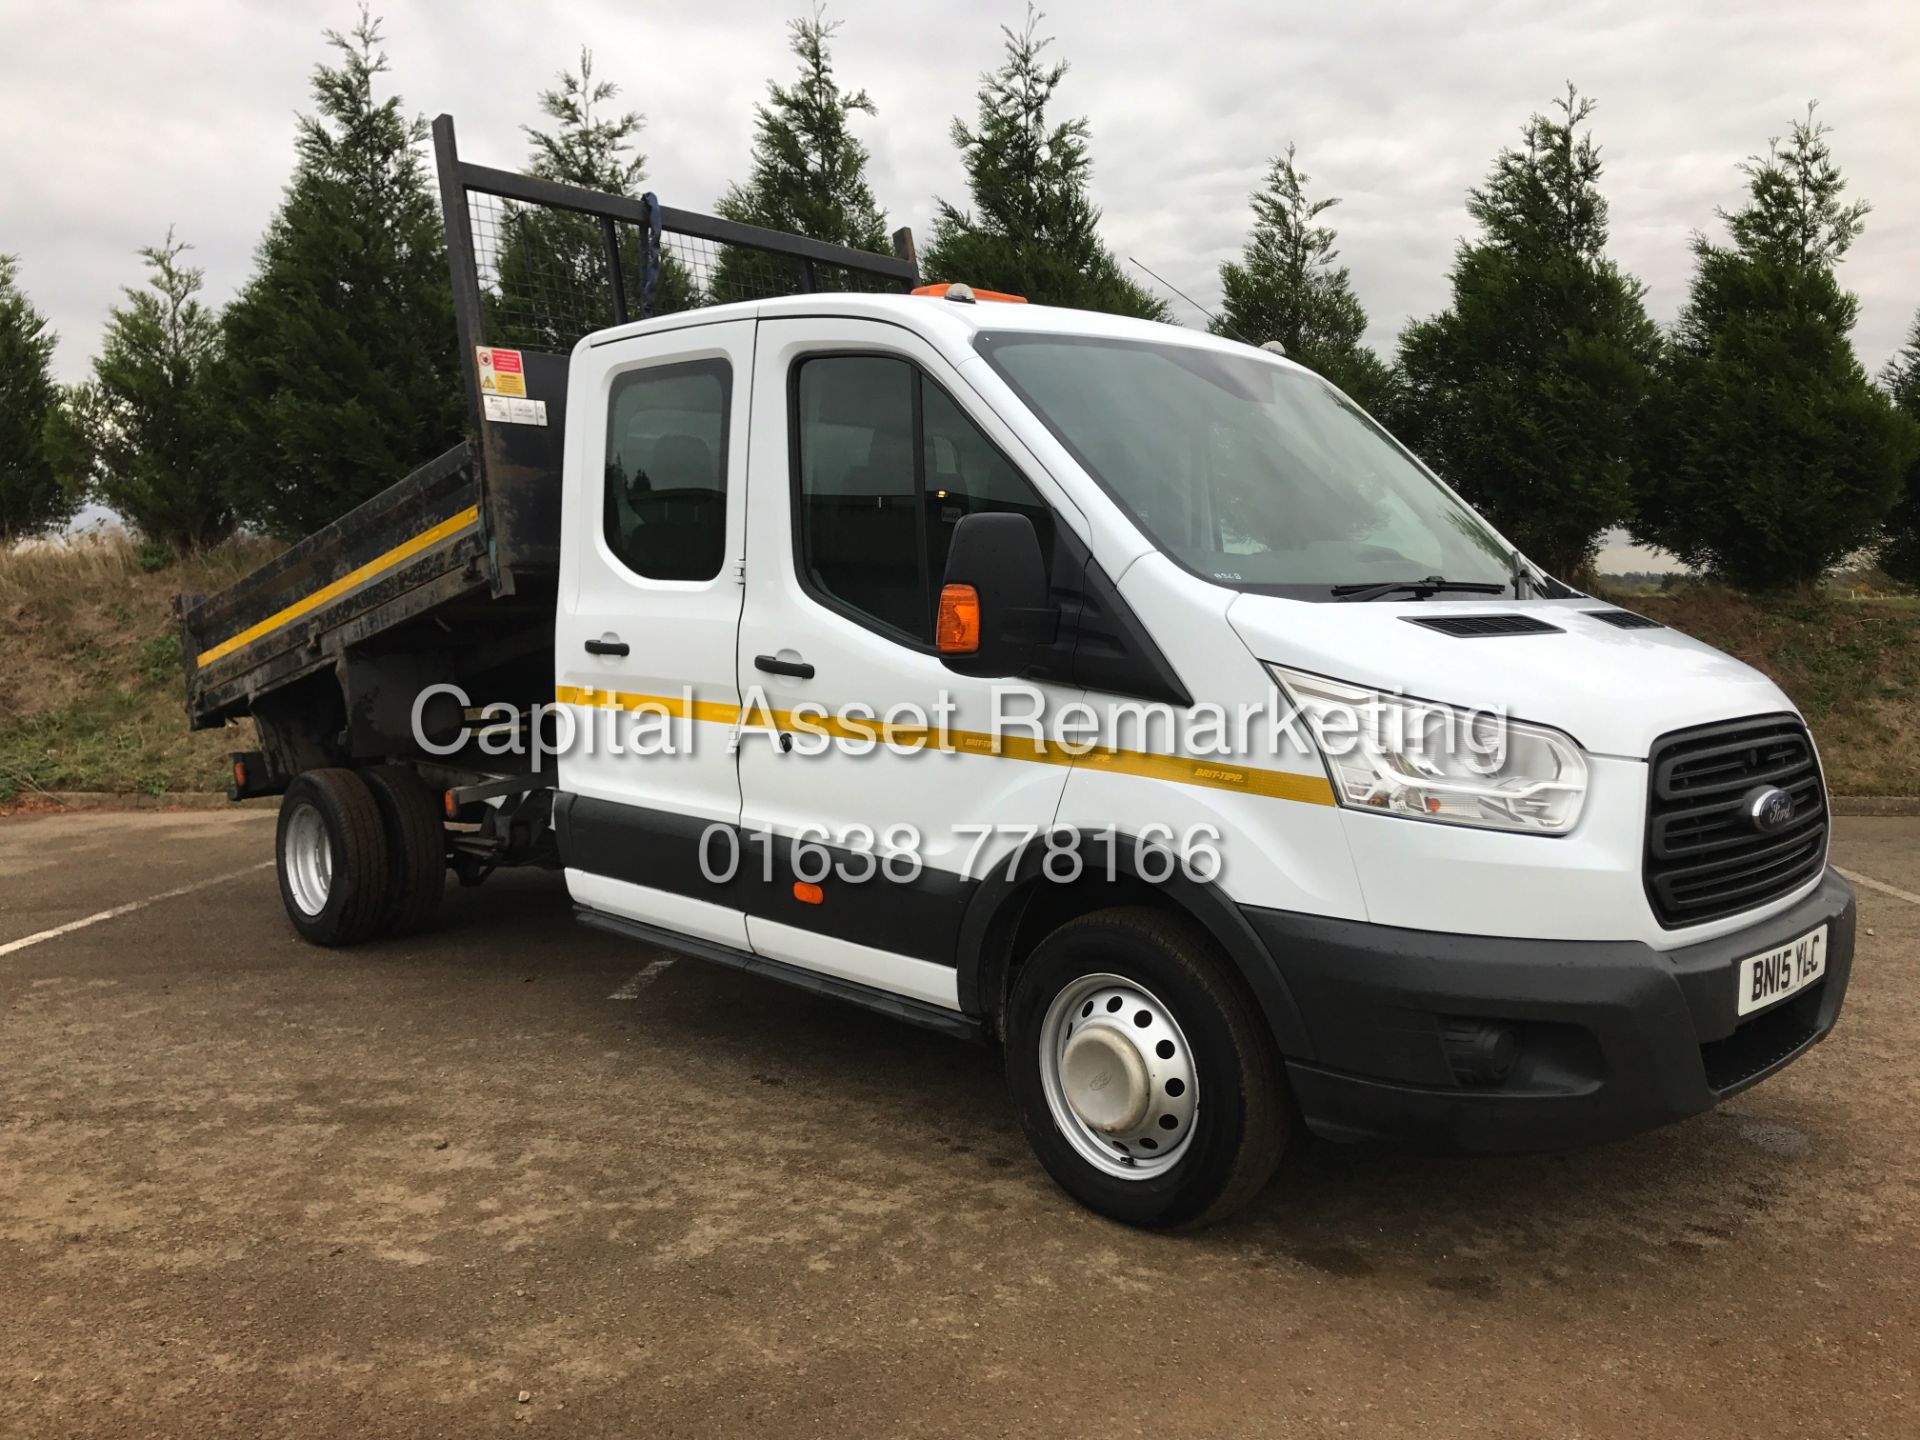 FORD TRANSIT 2.2TDCI "125PSI" T350 TIPPER TRUCK - DOUBLE CAB (15 REG) 1 OWNER - TWIN REAR WHEELS!!! - Image 9 of 15